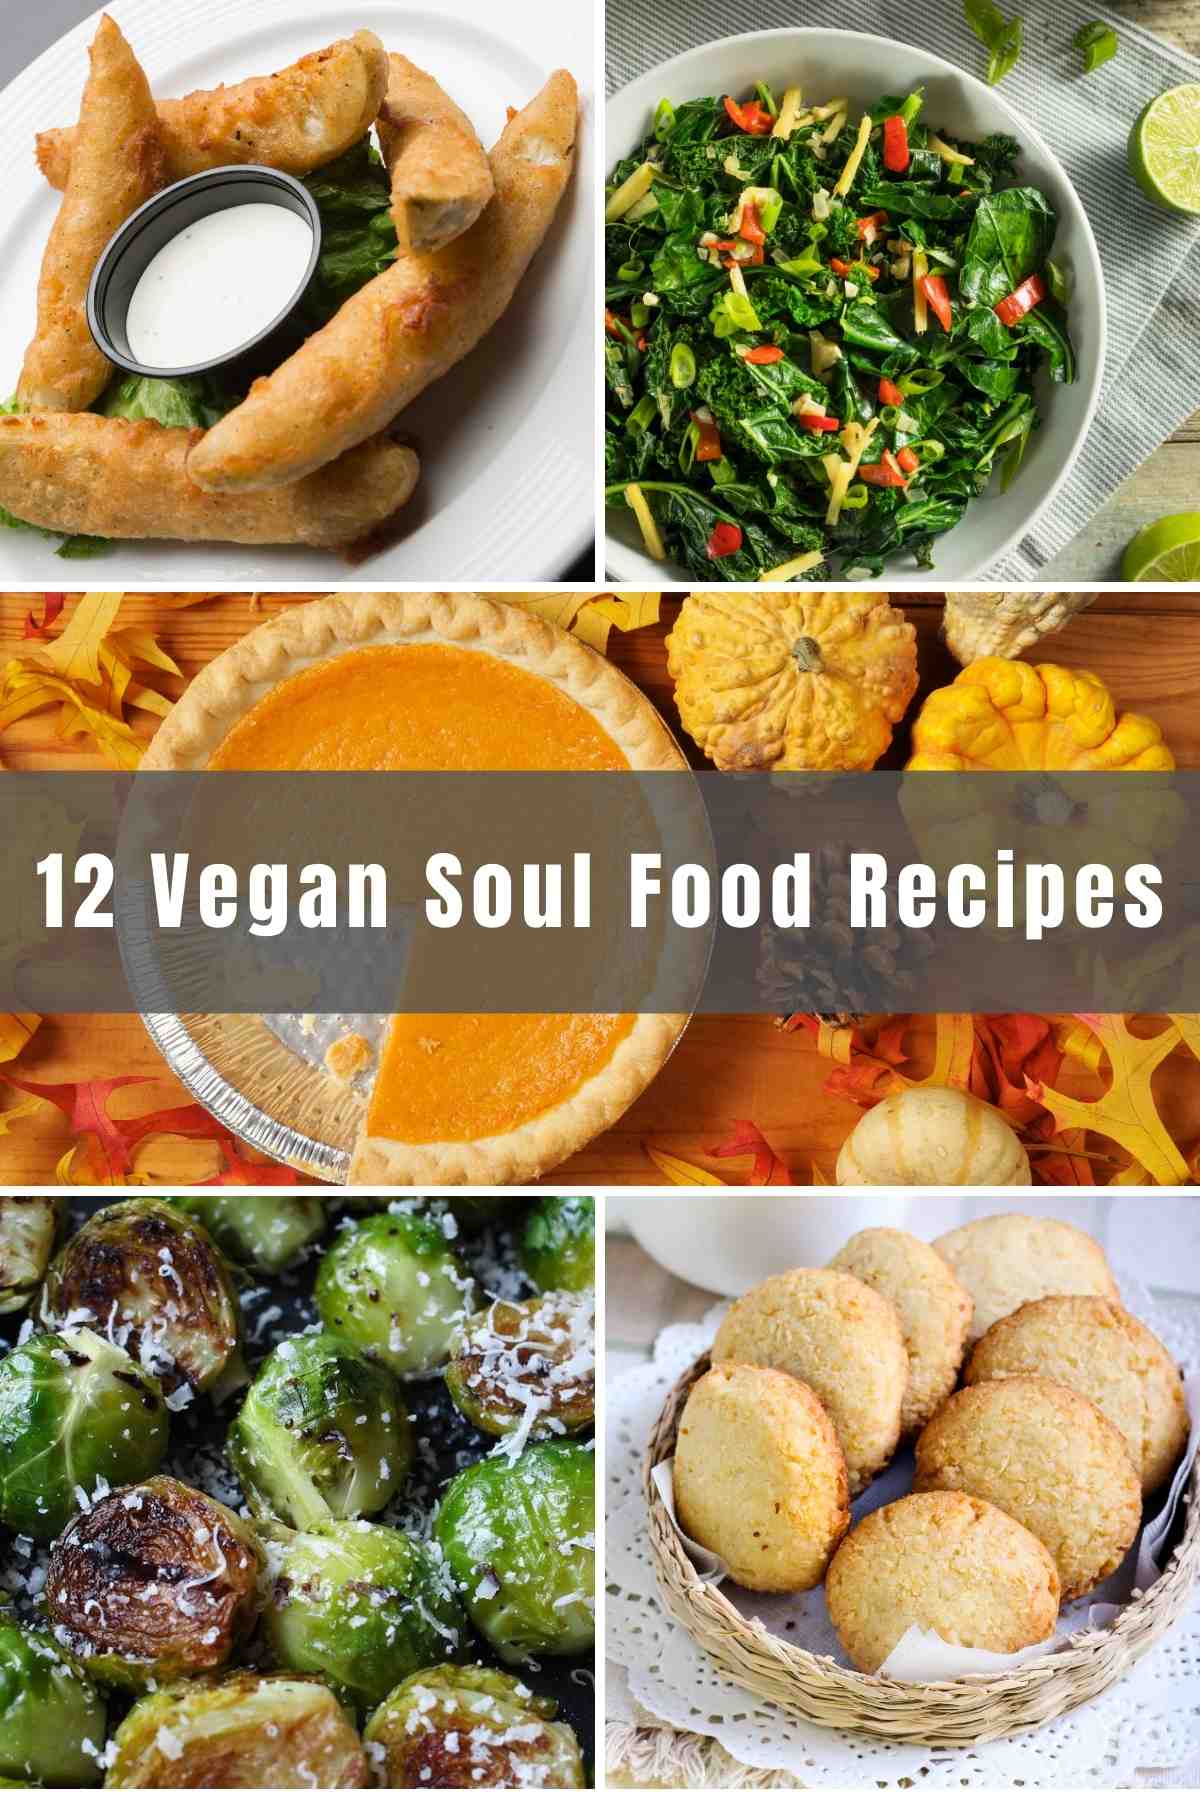 When we think about soul food, visions of corn bread, fried chicken and sweet potato pie come to mind. If you’re following a vegan lifestyle, there’s no reason why you can’t enjoy delicious southern-inspired dishes too! We’ve collected 12 of the Best Vegan Soul Food Recipes that are healthy, easy to prepare, and absolutely mouth-watering.